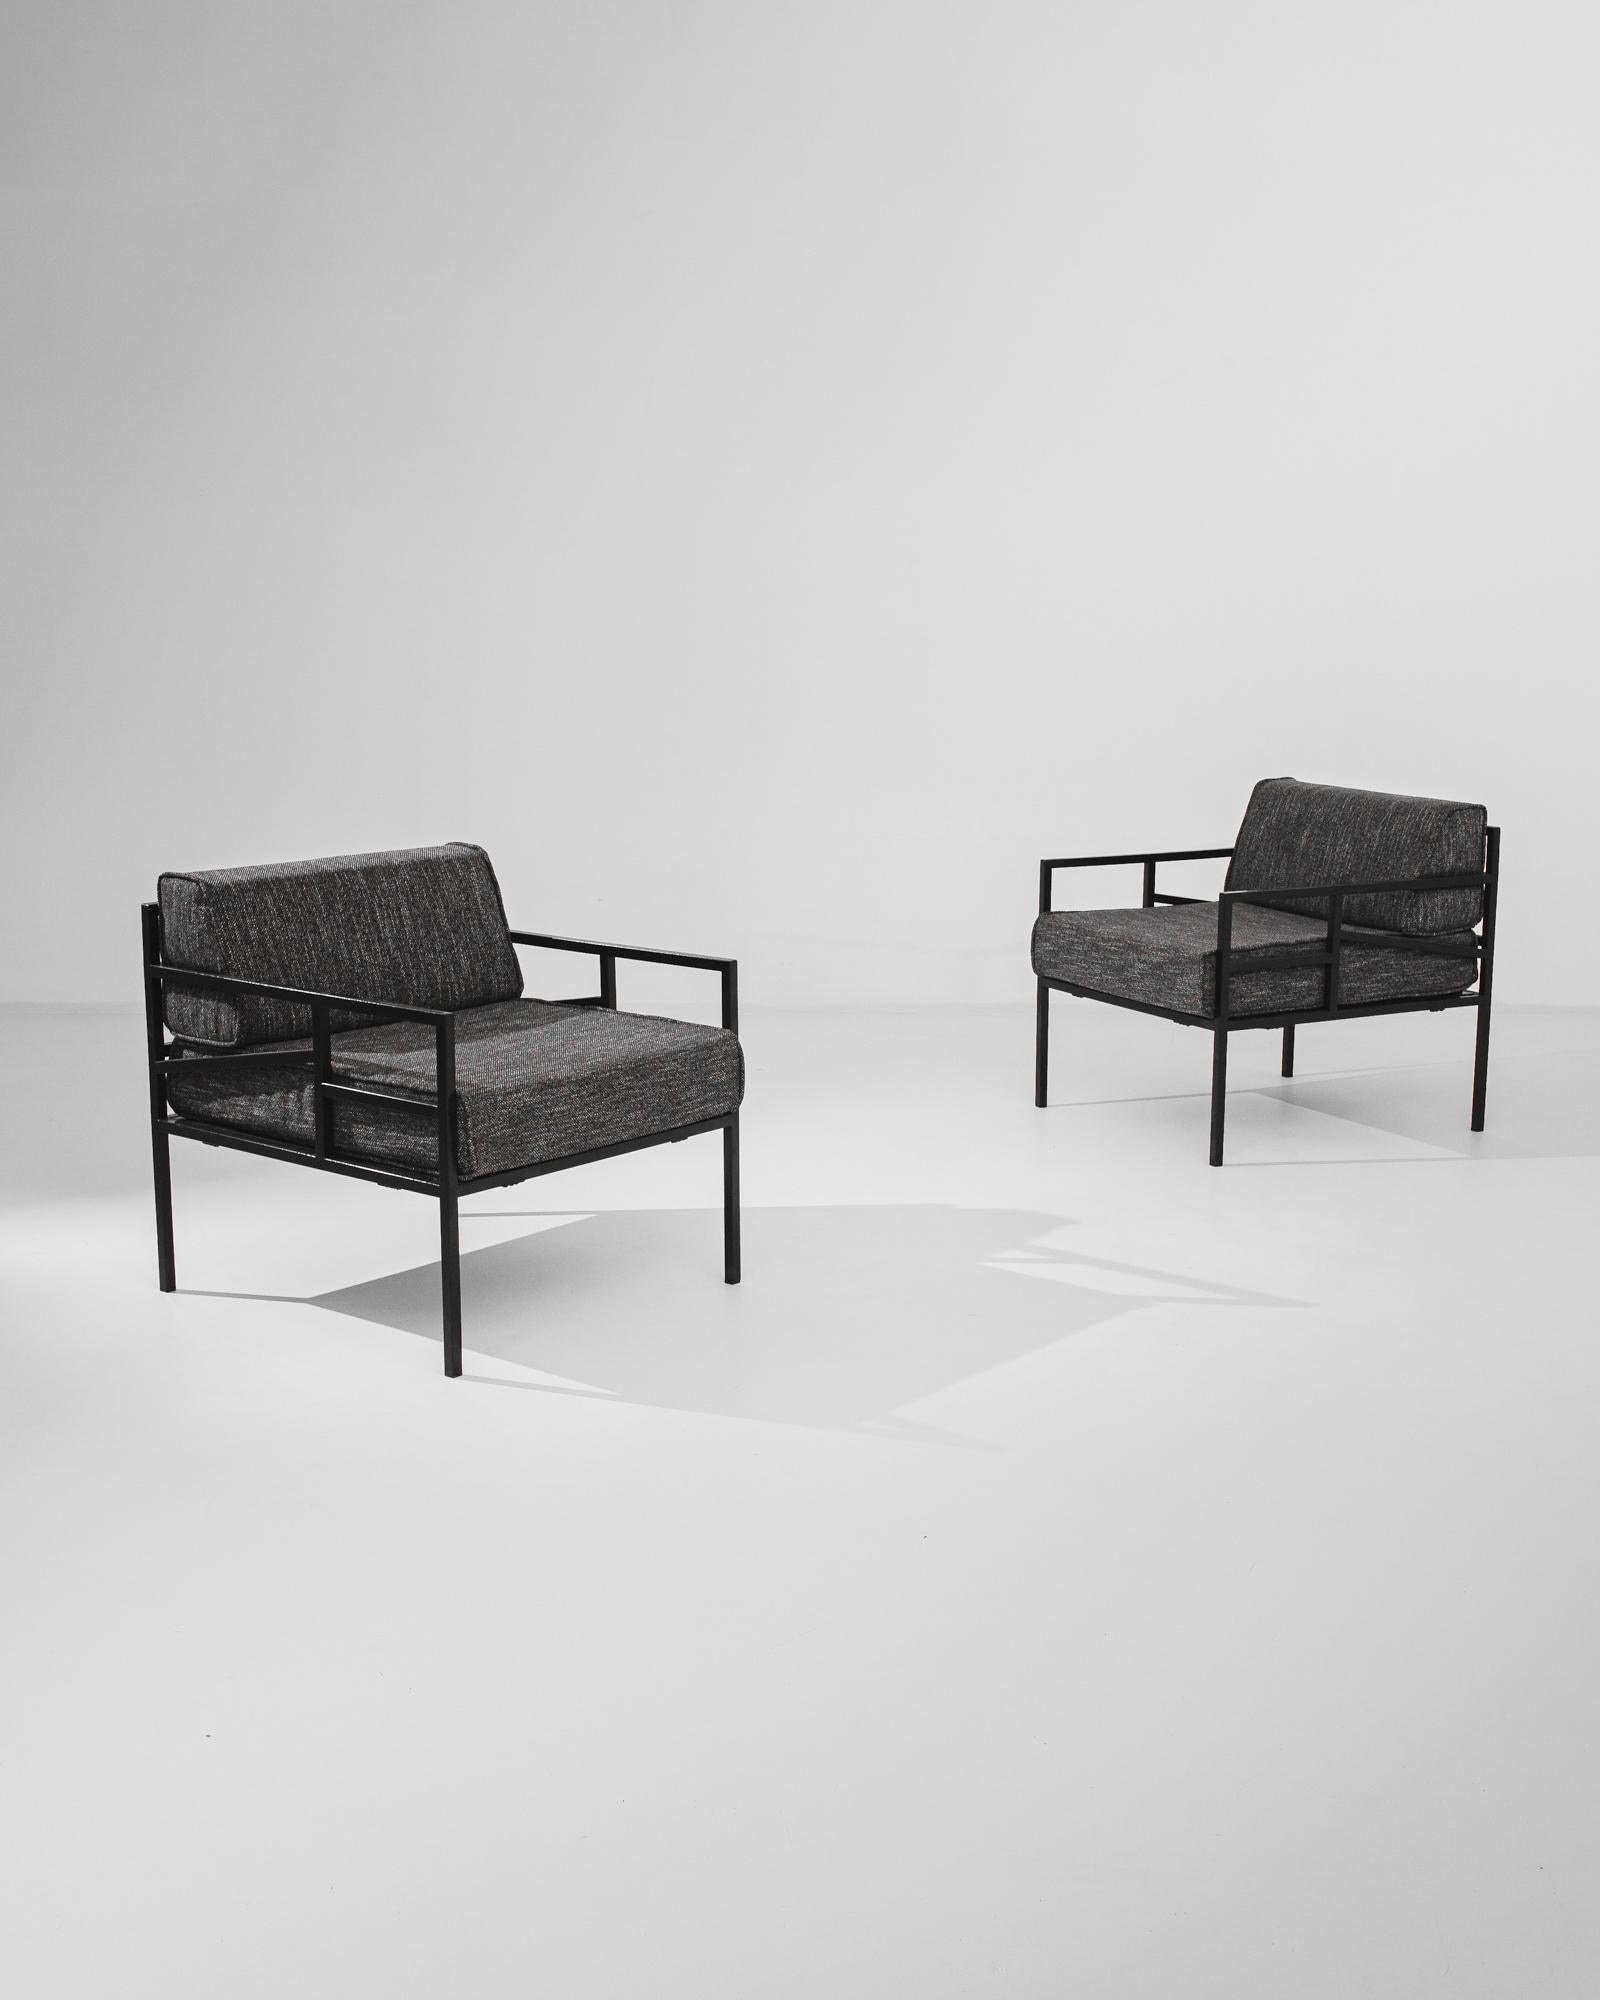 A pair of armchairs from 1960s France with a sleek Modernist aesthetic. A stylish, grid-like frame of black metal supports generous cushions upholstered in grey twill. Dynamic proportions and angular lines create an innovative contemporary